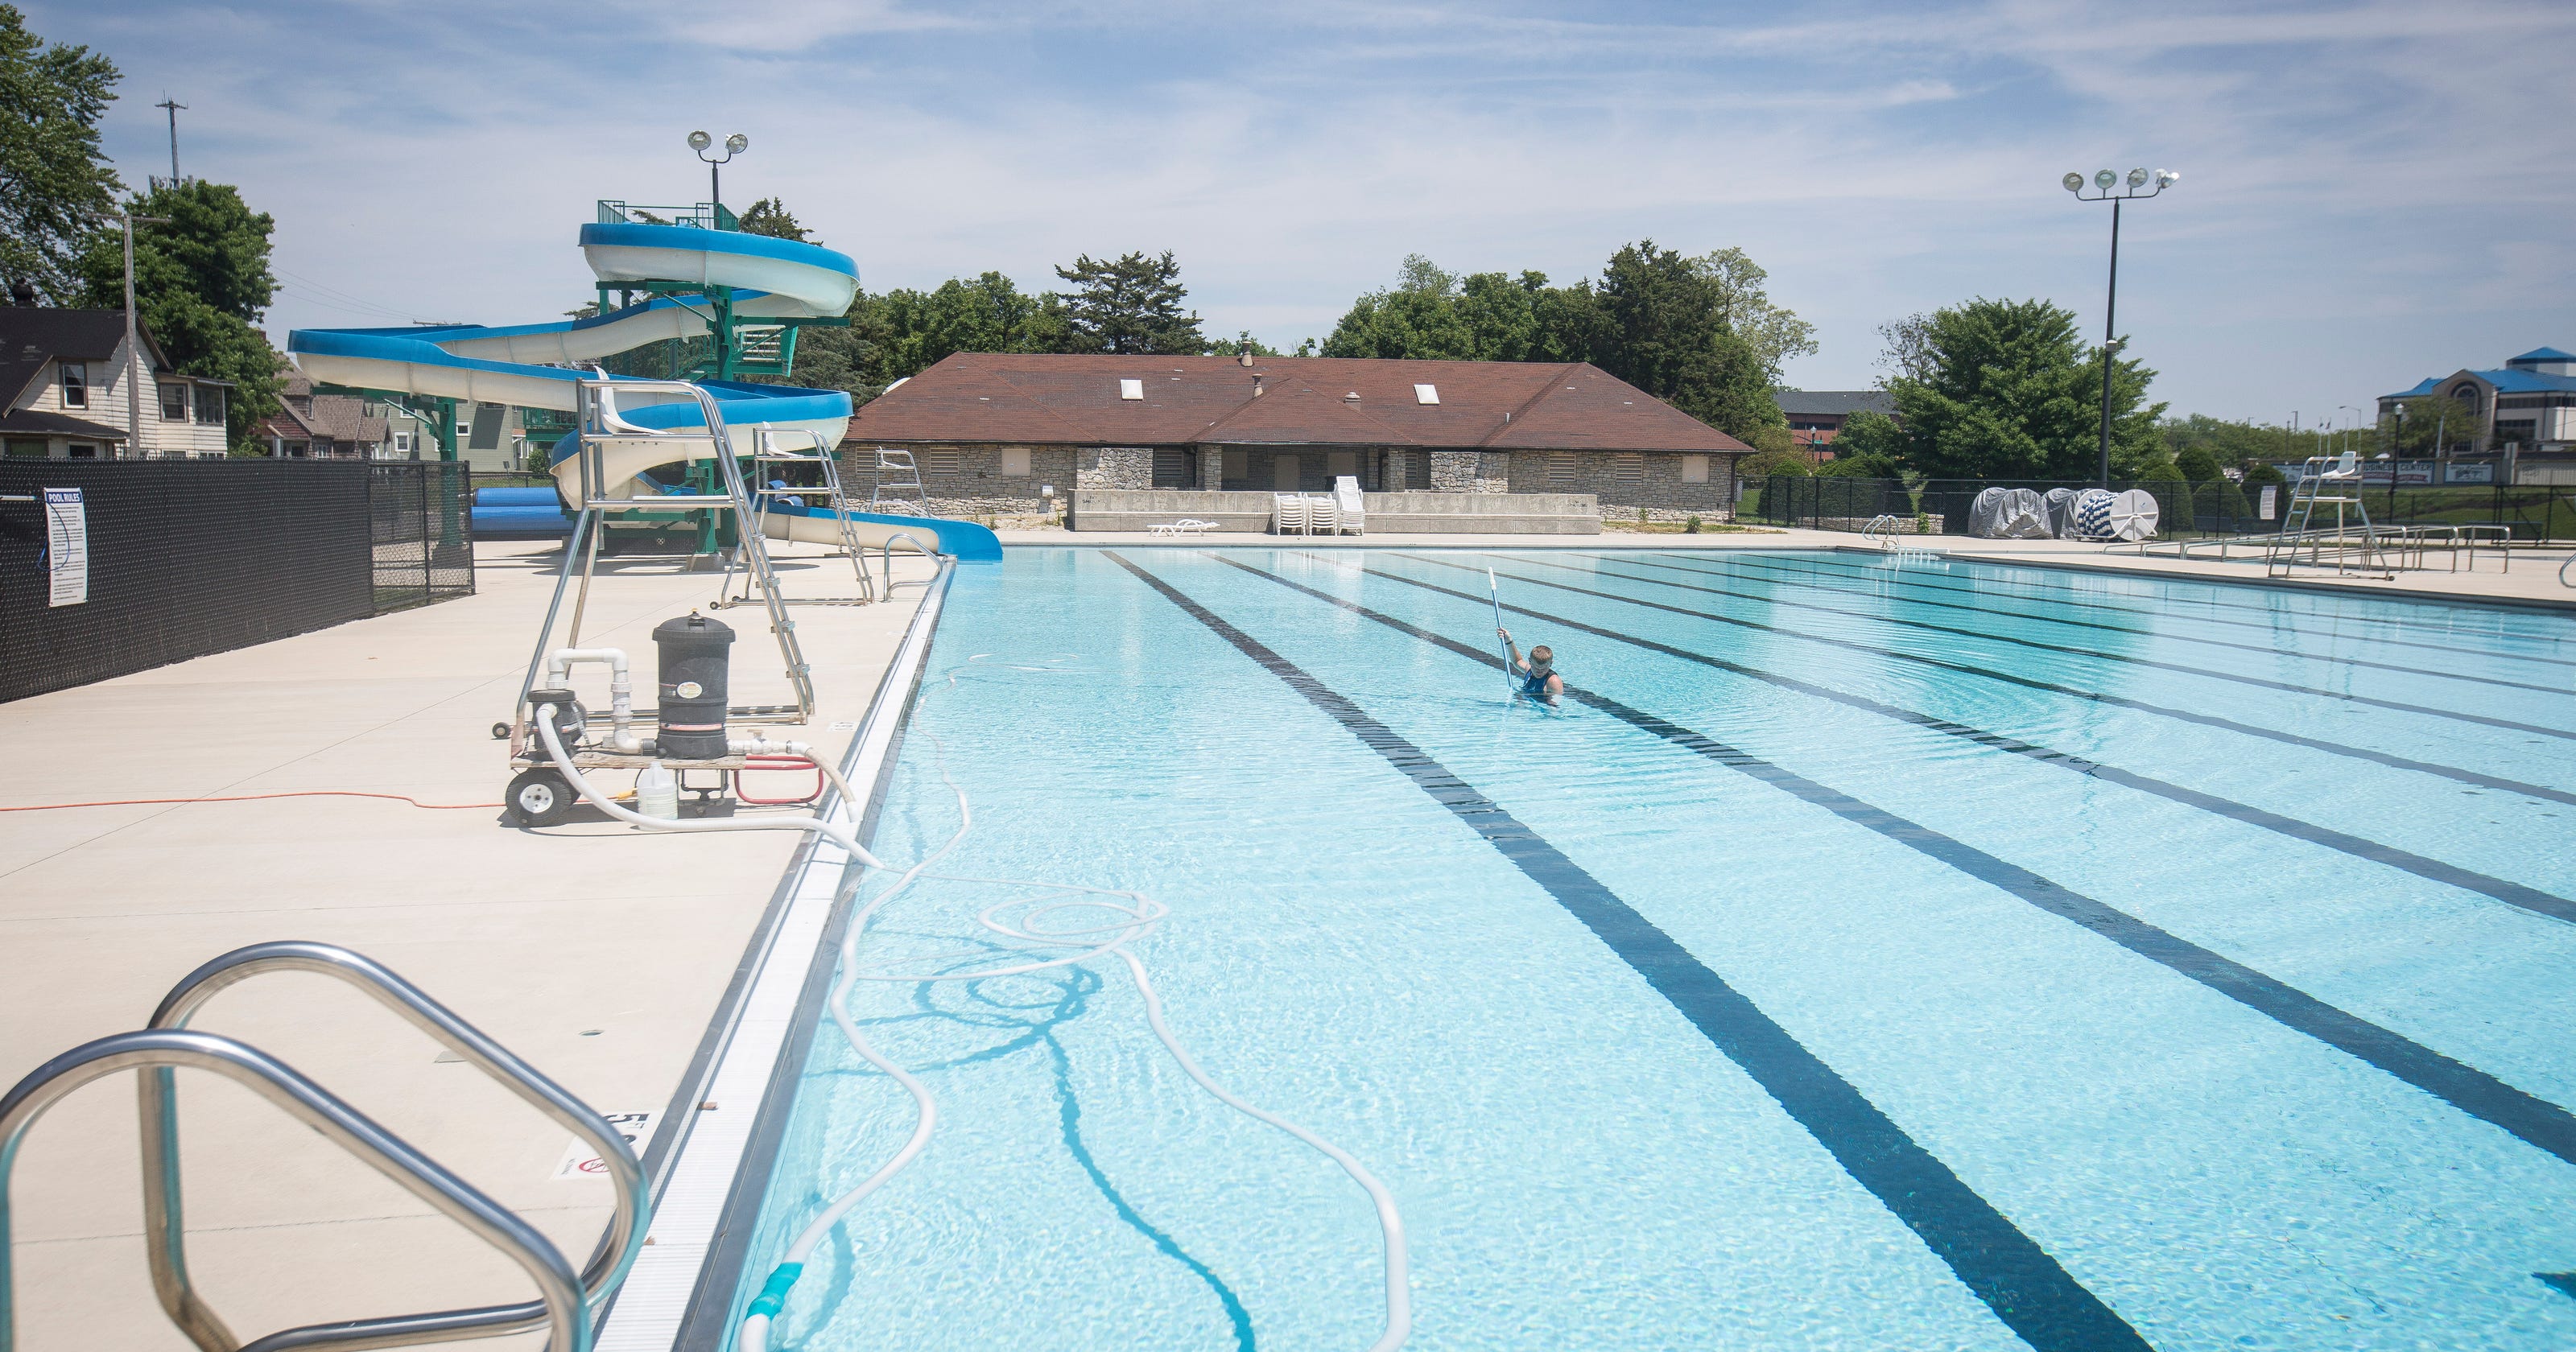 List Hours, prices for area public pools